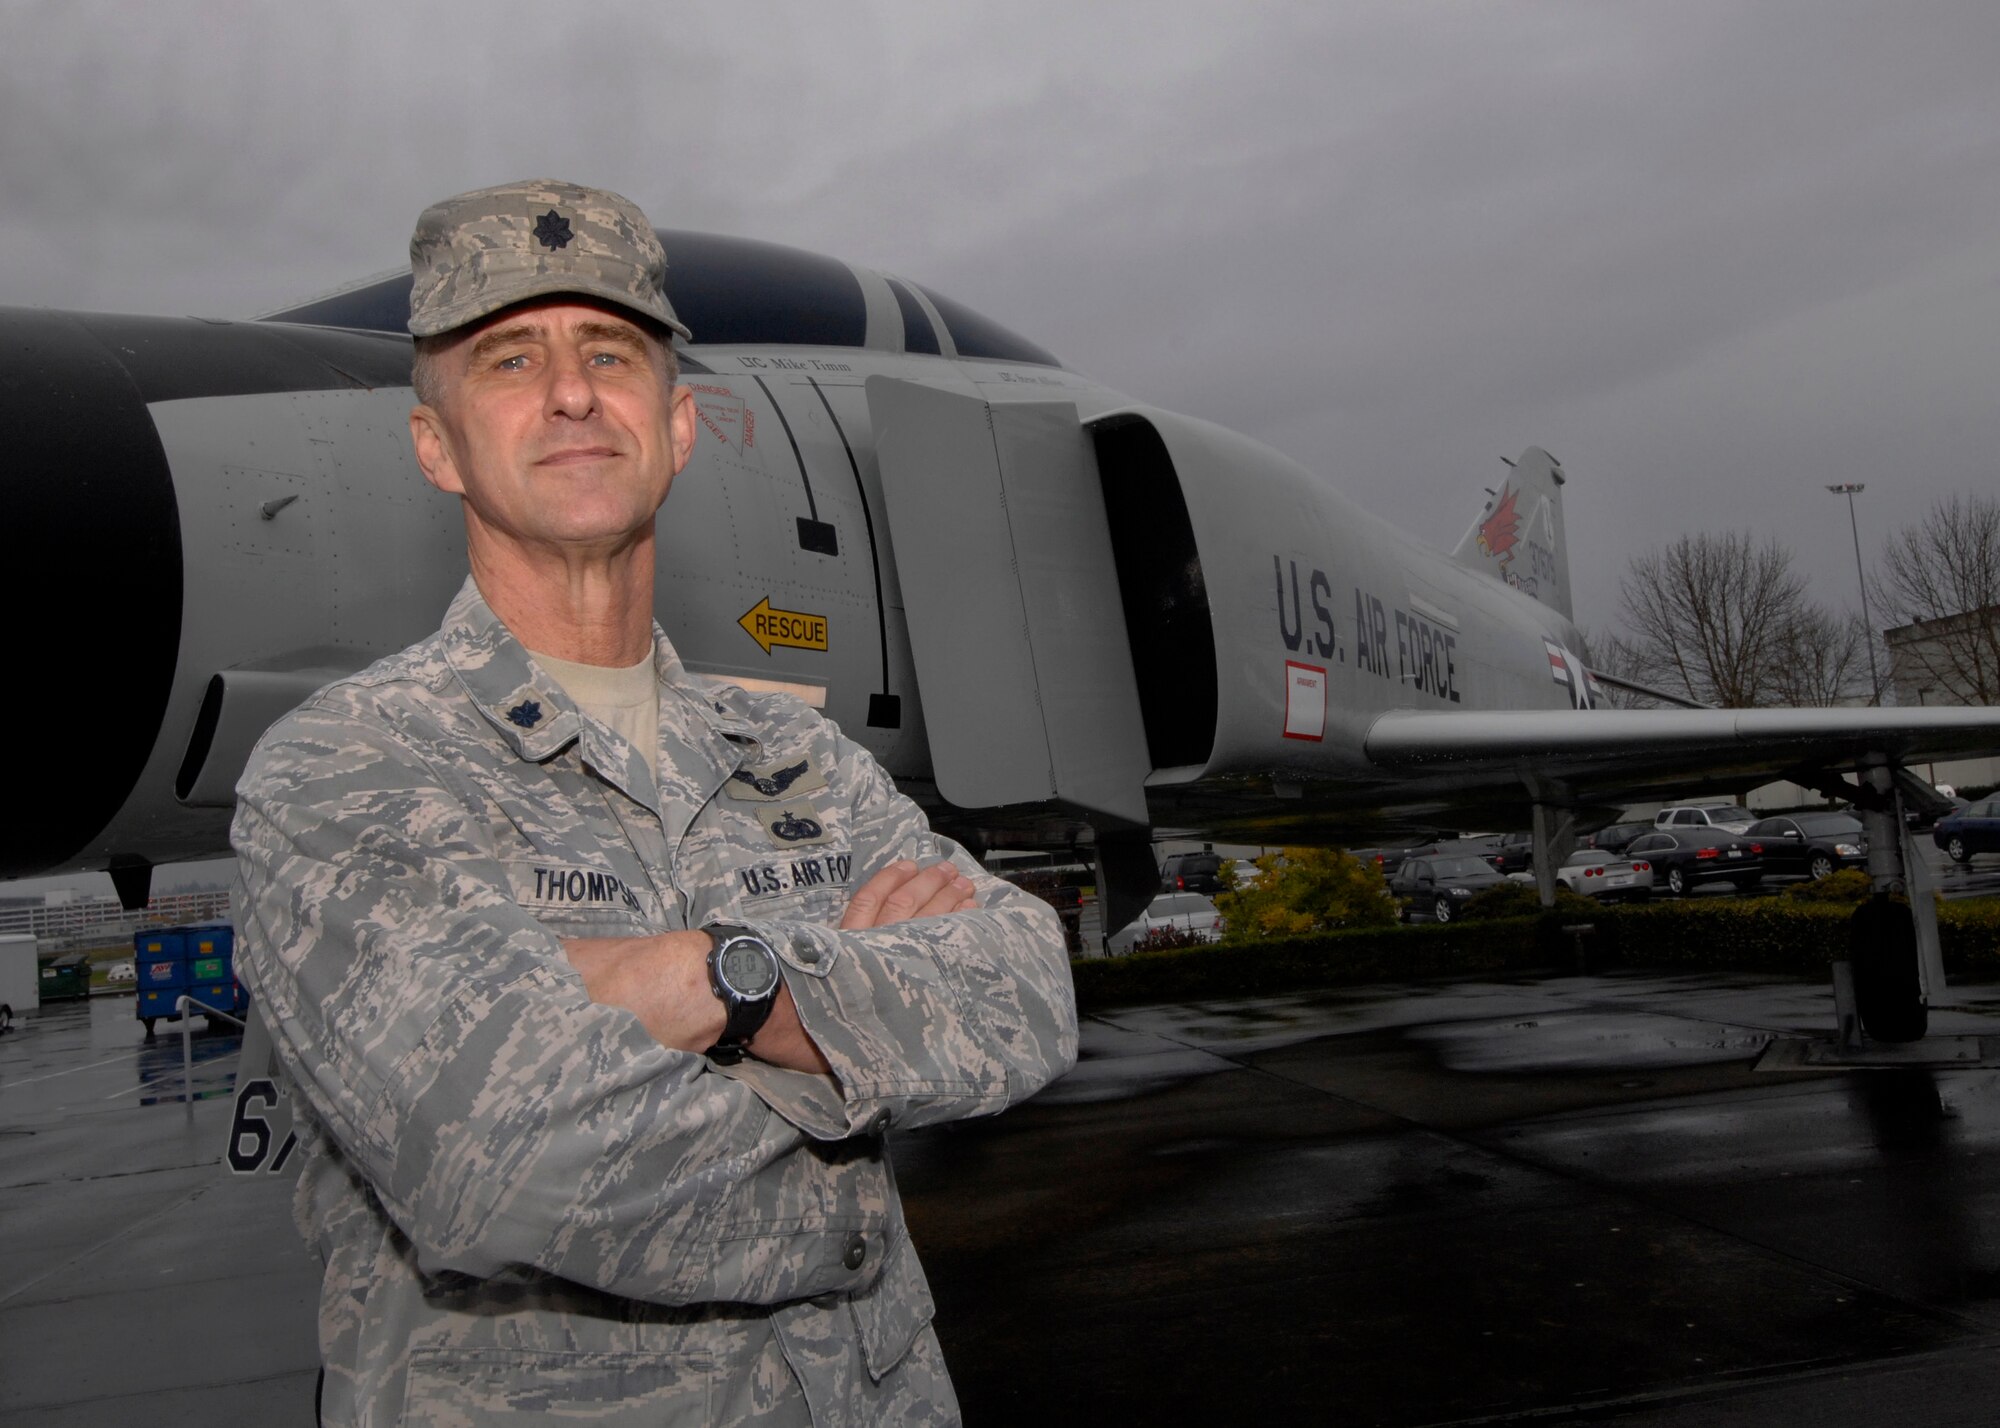 Oregon Air National Lt. Col. Gary Thompson stands in front of the F-4C aircraft on display at the Portland Air National Guard Base, Portland, Ore., on his last day of active, Oct. 31, 2012. Thompson won the top shooter award as a Weapons Systems Officer flying in one of the 142nd Fighter Wing's F-4C models at the 1988 William Tell Weapons meet at Tyndall AFB, Fla. (U.S. Air Force photo by Tech. Sgt. John Hughel, 142nd Fighter Wing Public Affairs / released)  
